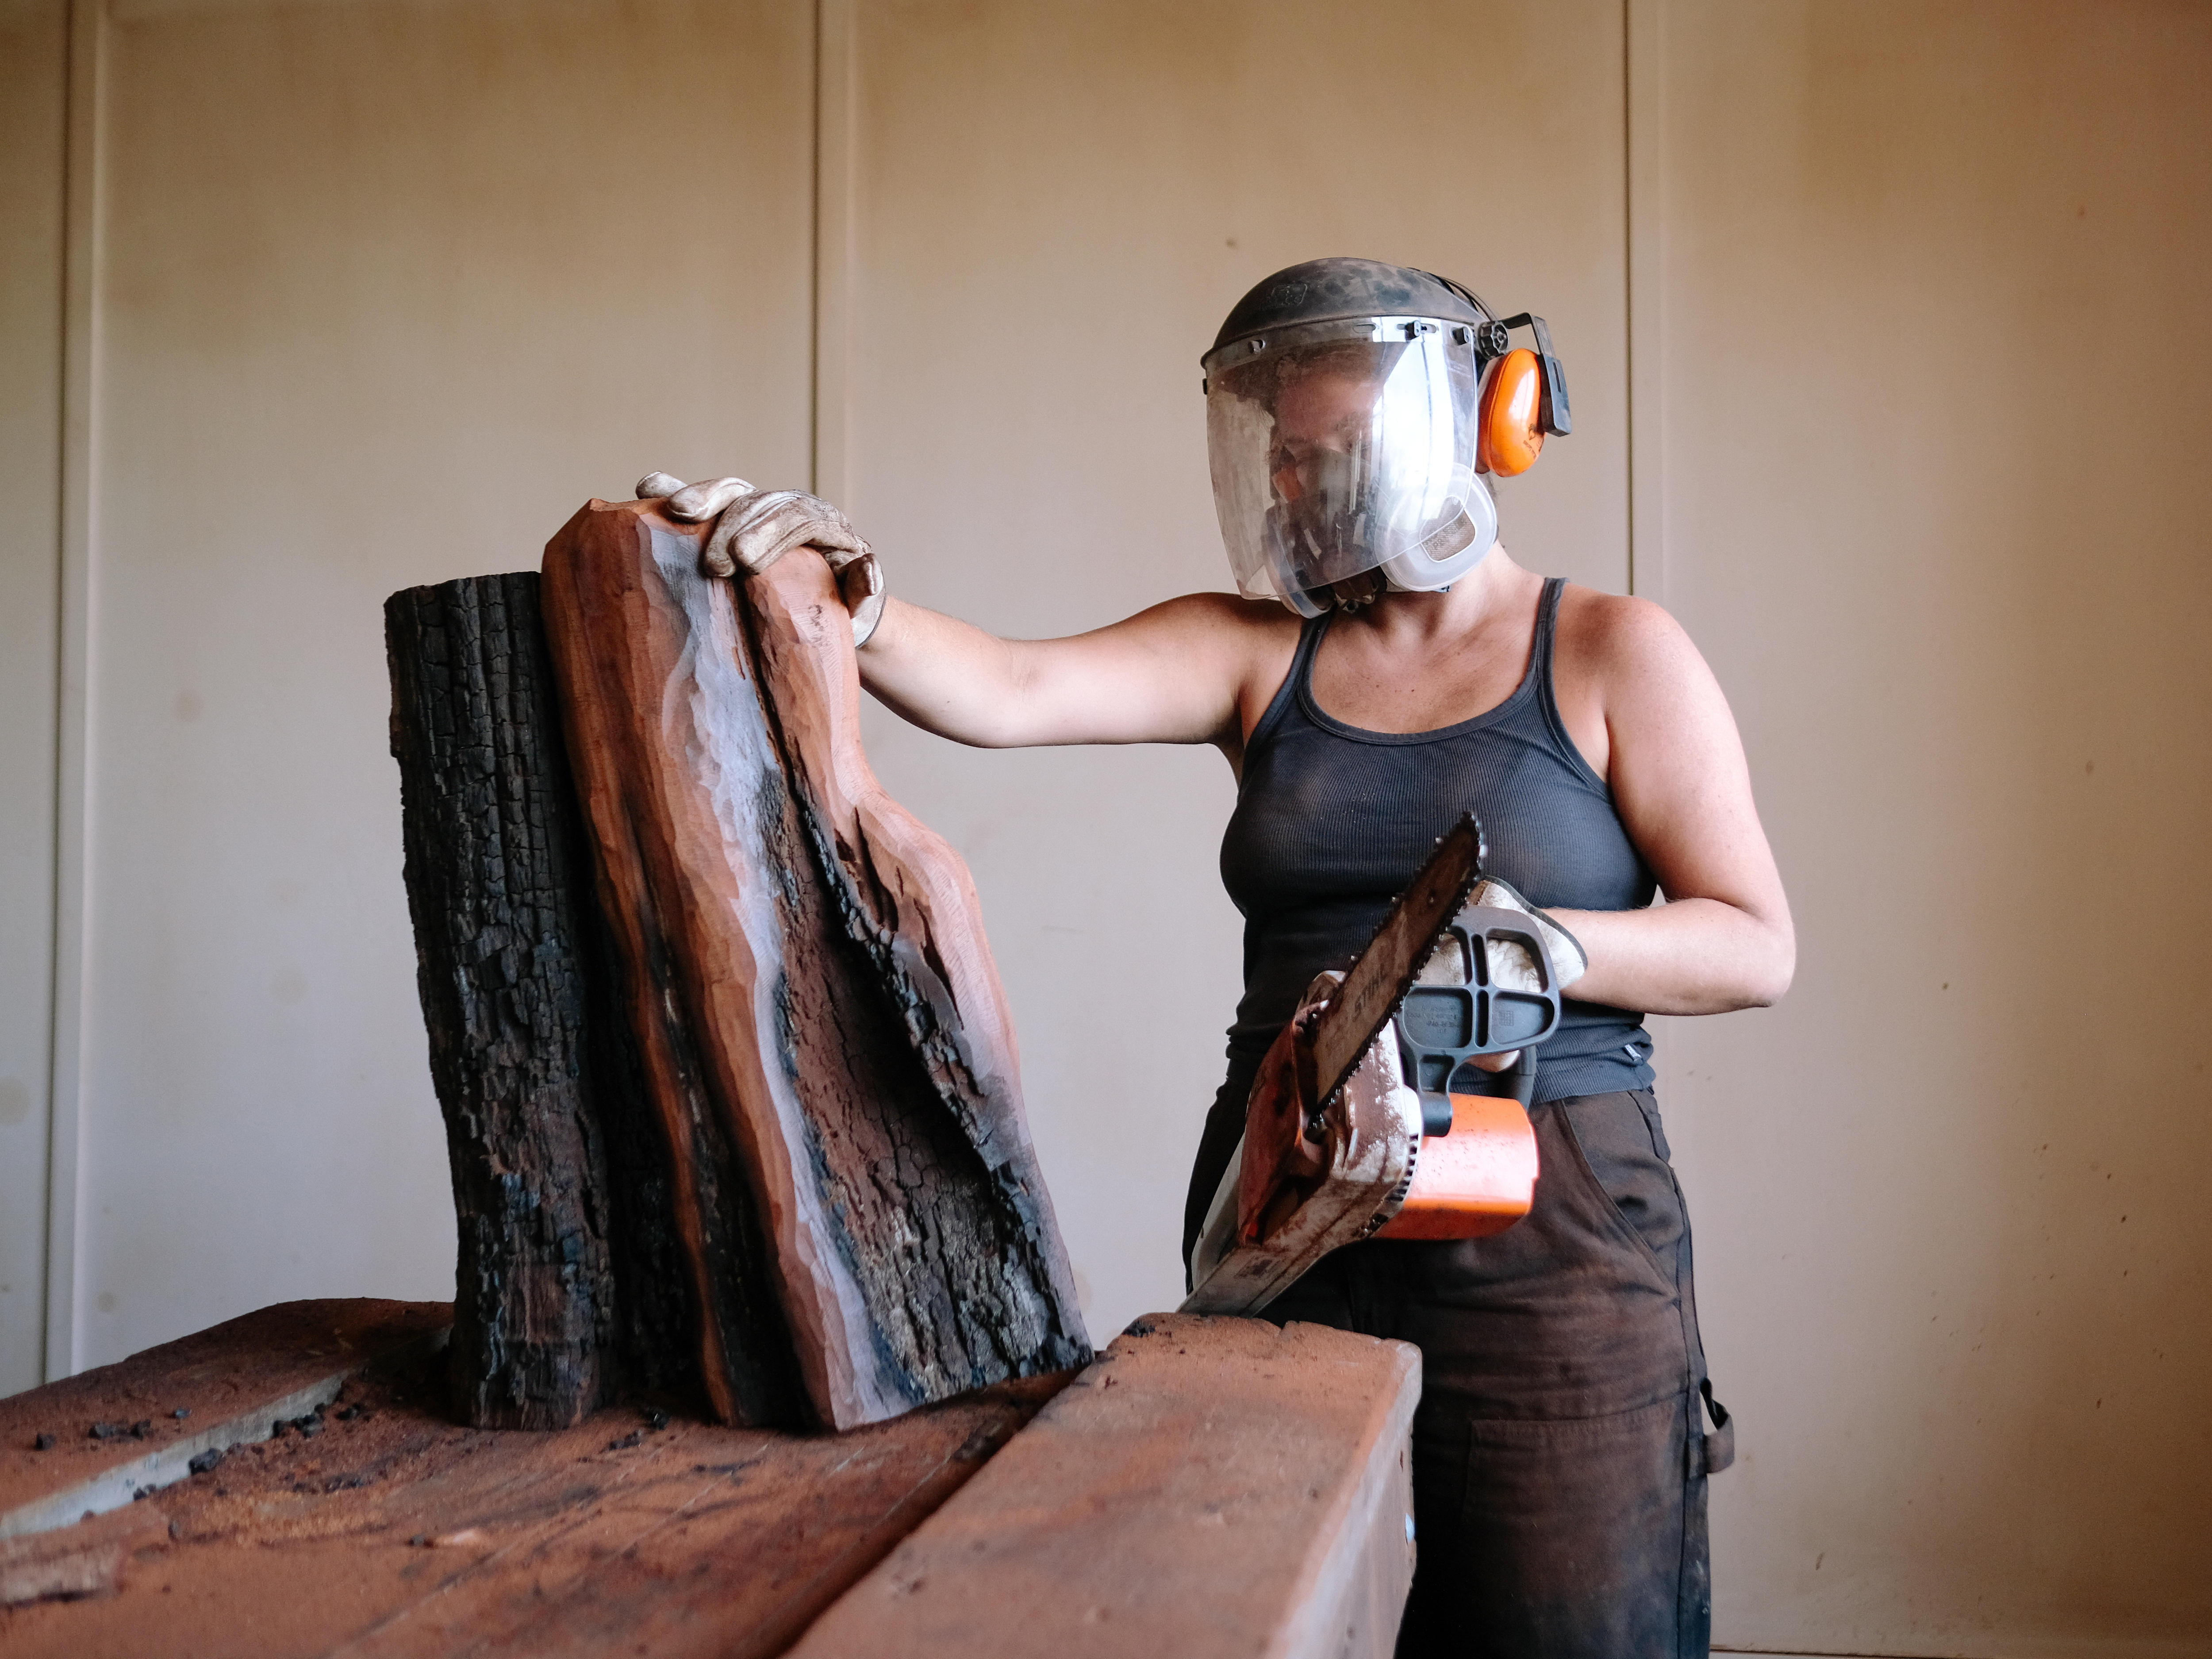 Artist in process of making a sculpture from wood, holding a chainsaw and wearing a protective face mask and earmuffs